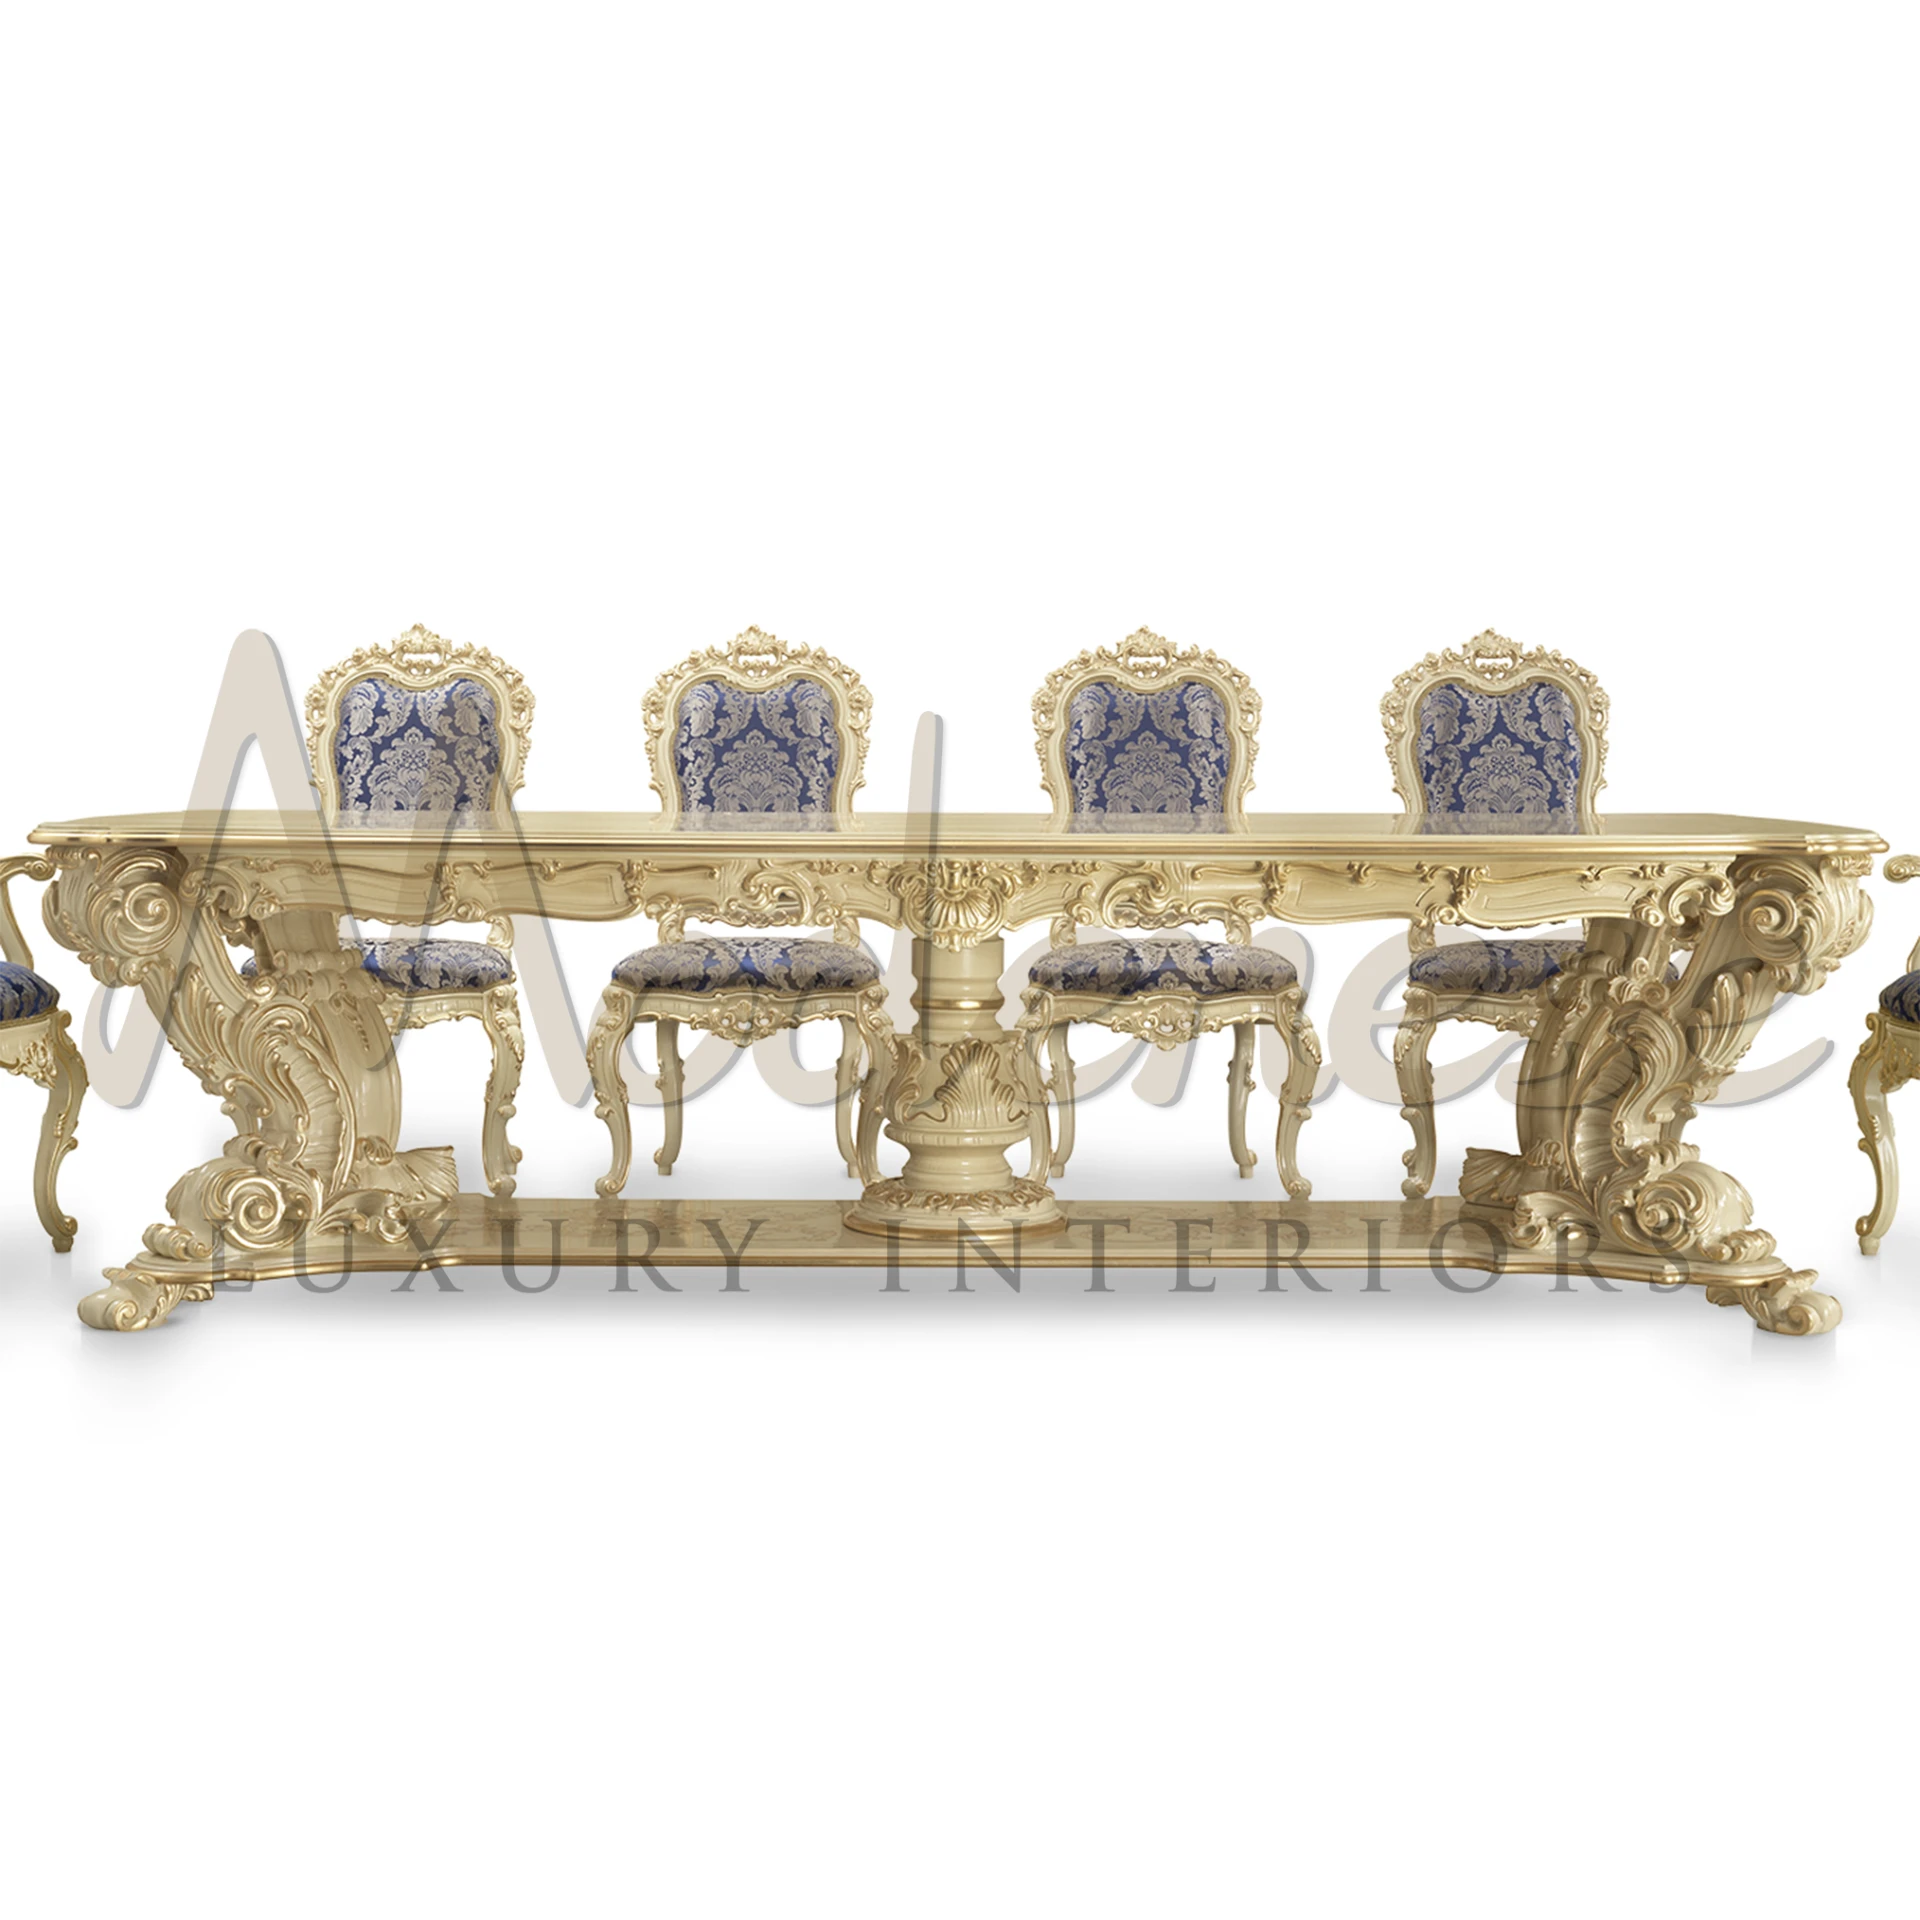 Luxurious Gold Leaf Carved Wood Dining Table with matching ornate chairs